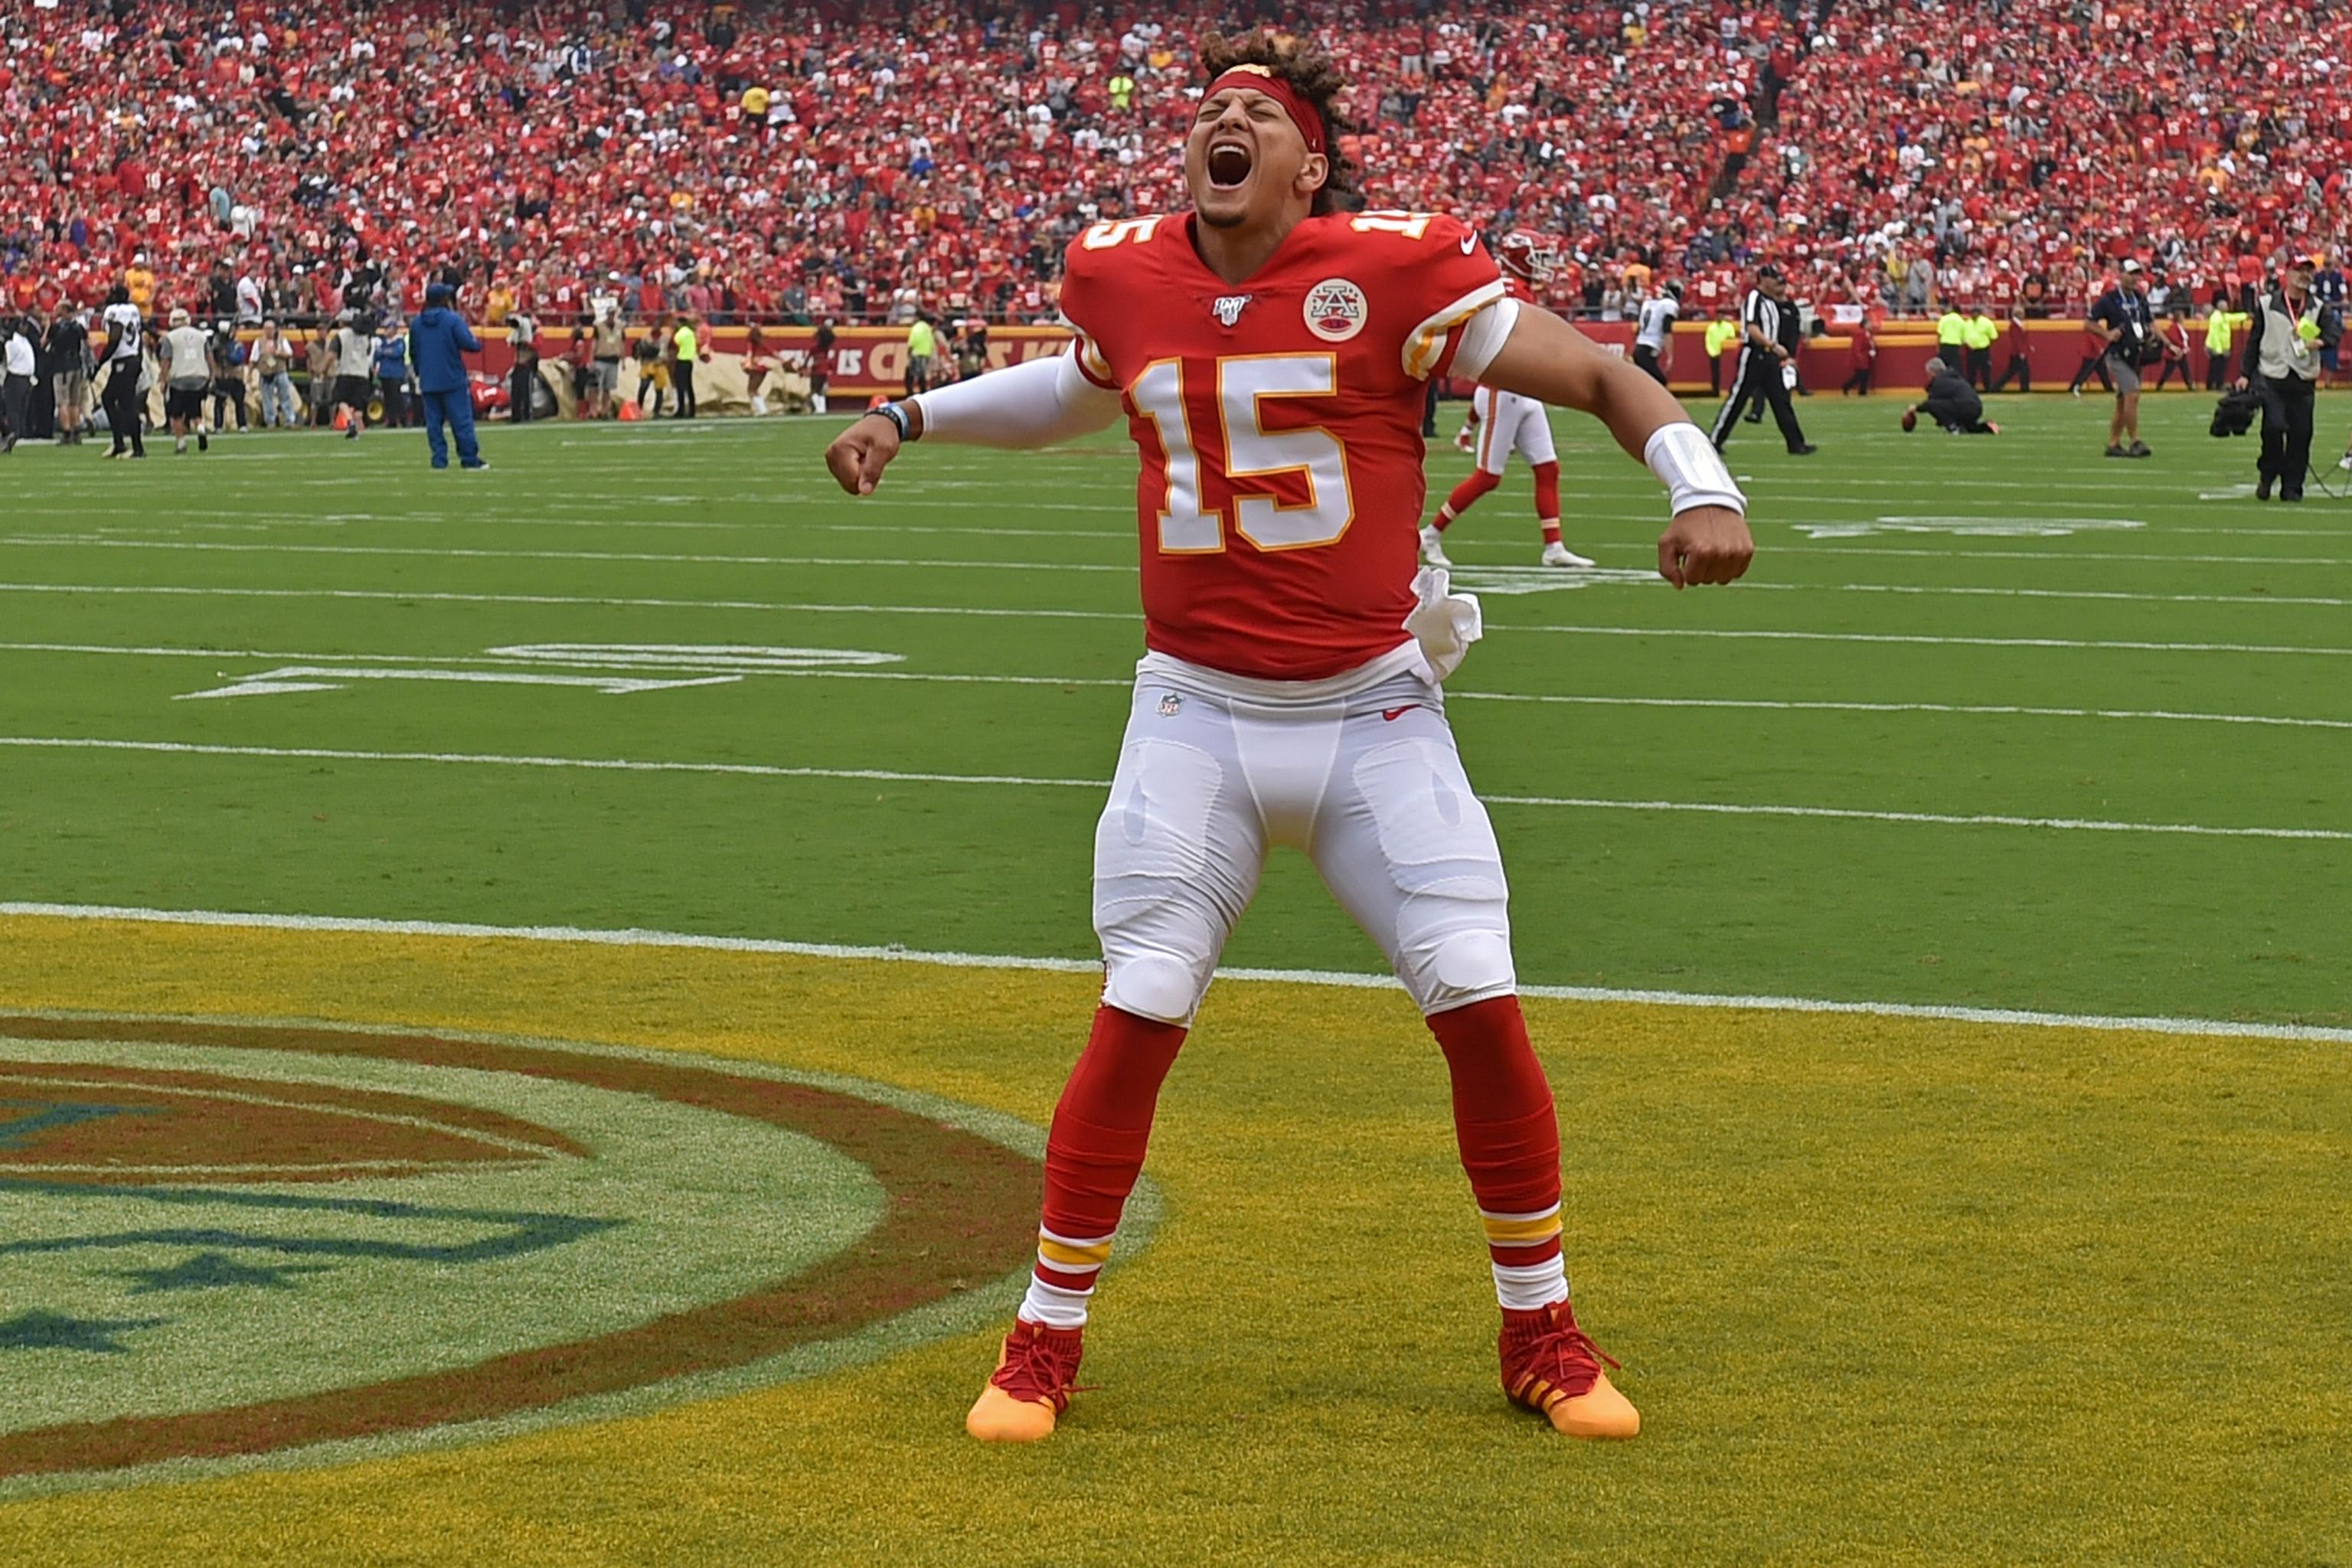 Video Espn S Adam Schefter Thinks Patrick Mahomes Could Receive 200m Contract Bleacher Report Latest News Videos And Highlights